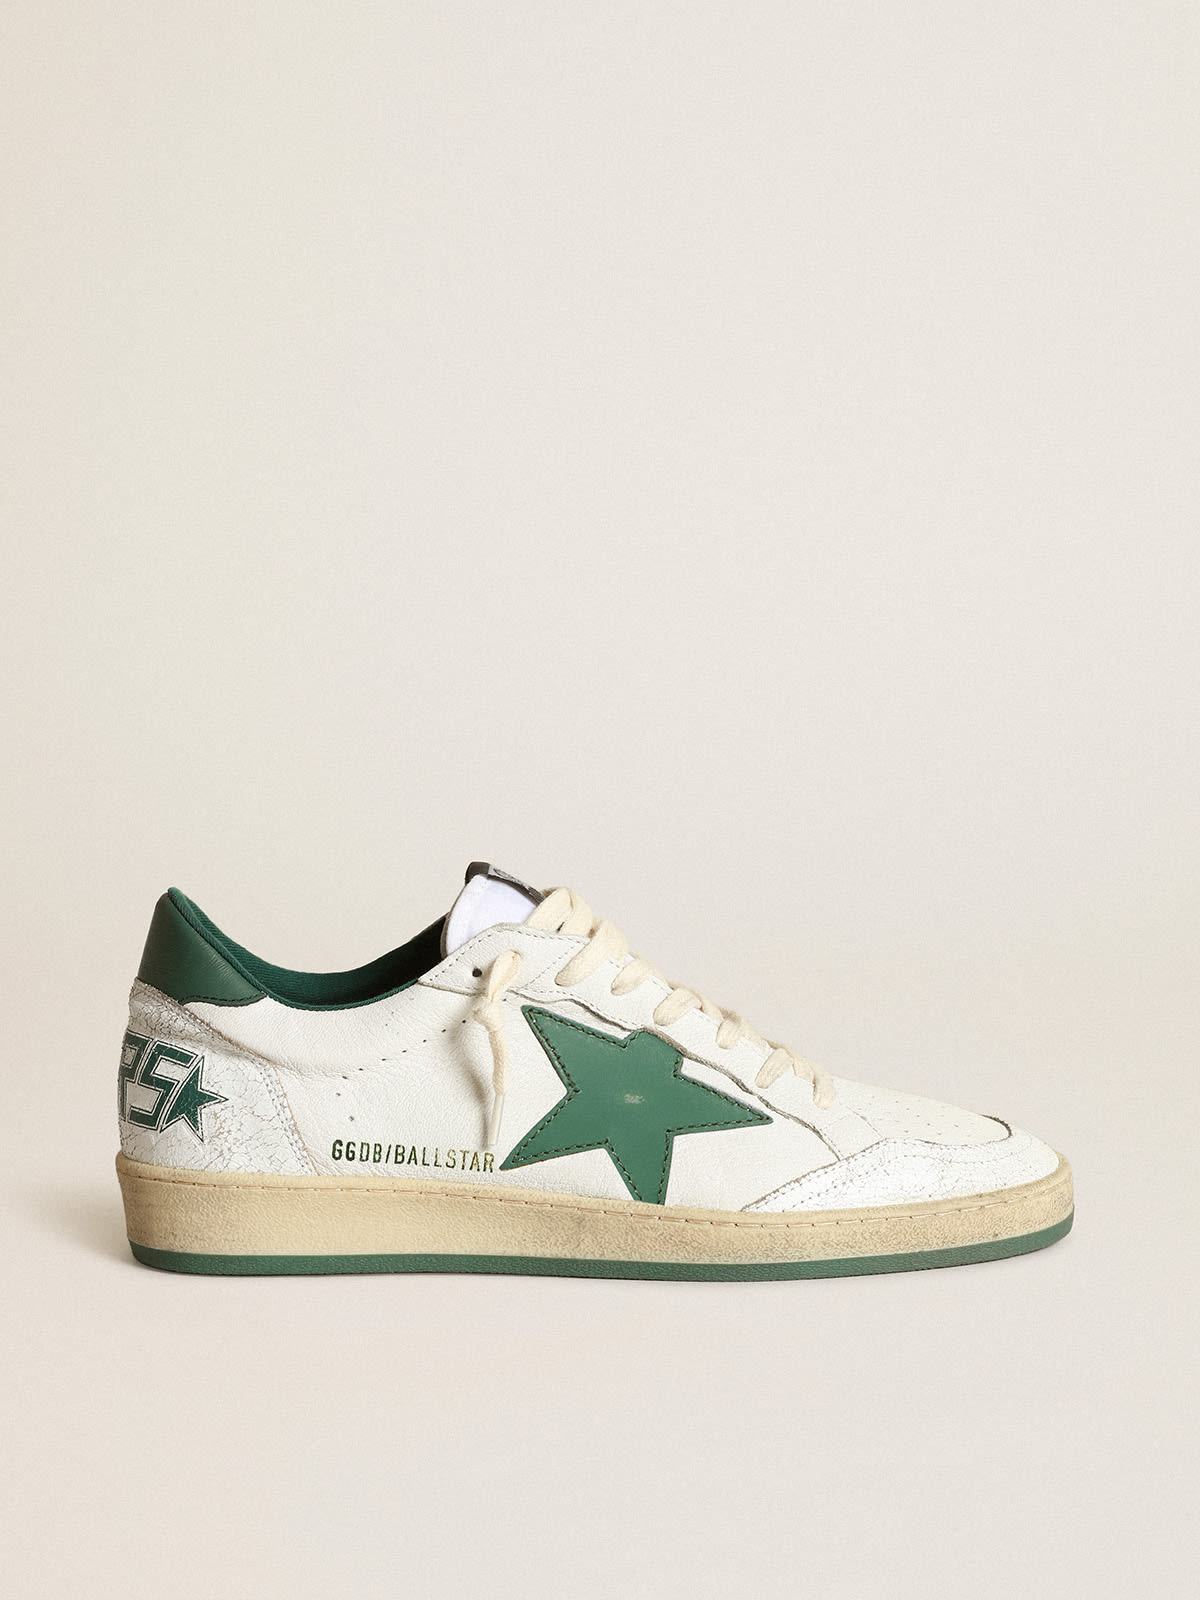 Ball Star sneakers in white nappa leather with mat green leather star and heel tab